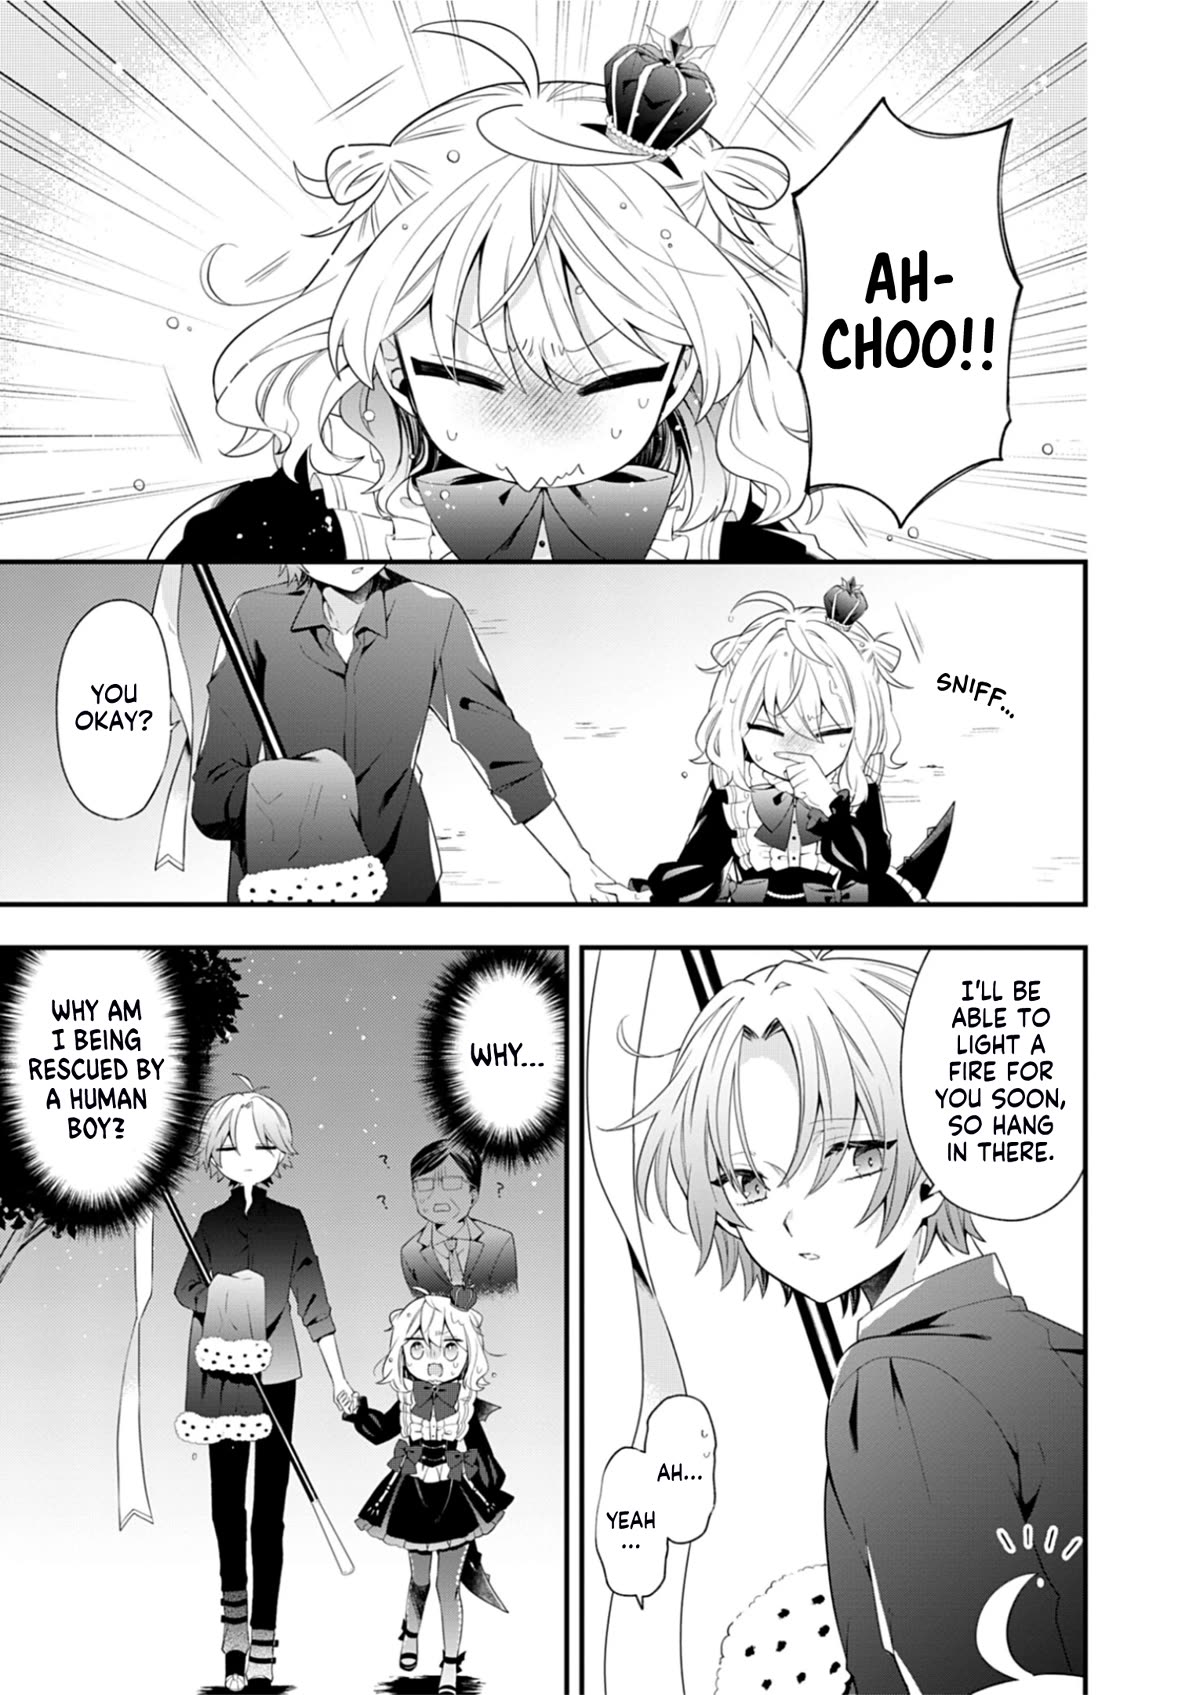 The Old Man That Was Reincarnated as a Young Girl in the Demon World Wants to Become the Demon Lord for the Sake of Peace - chapter 2 - #1